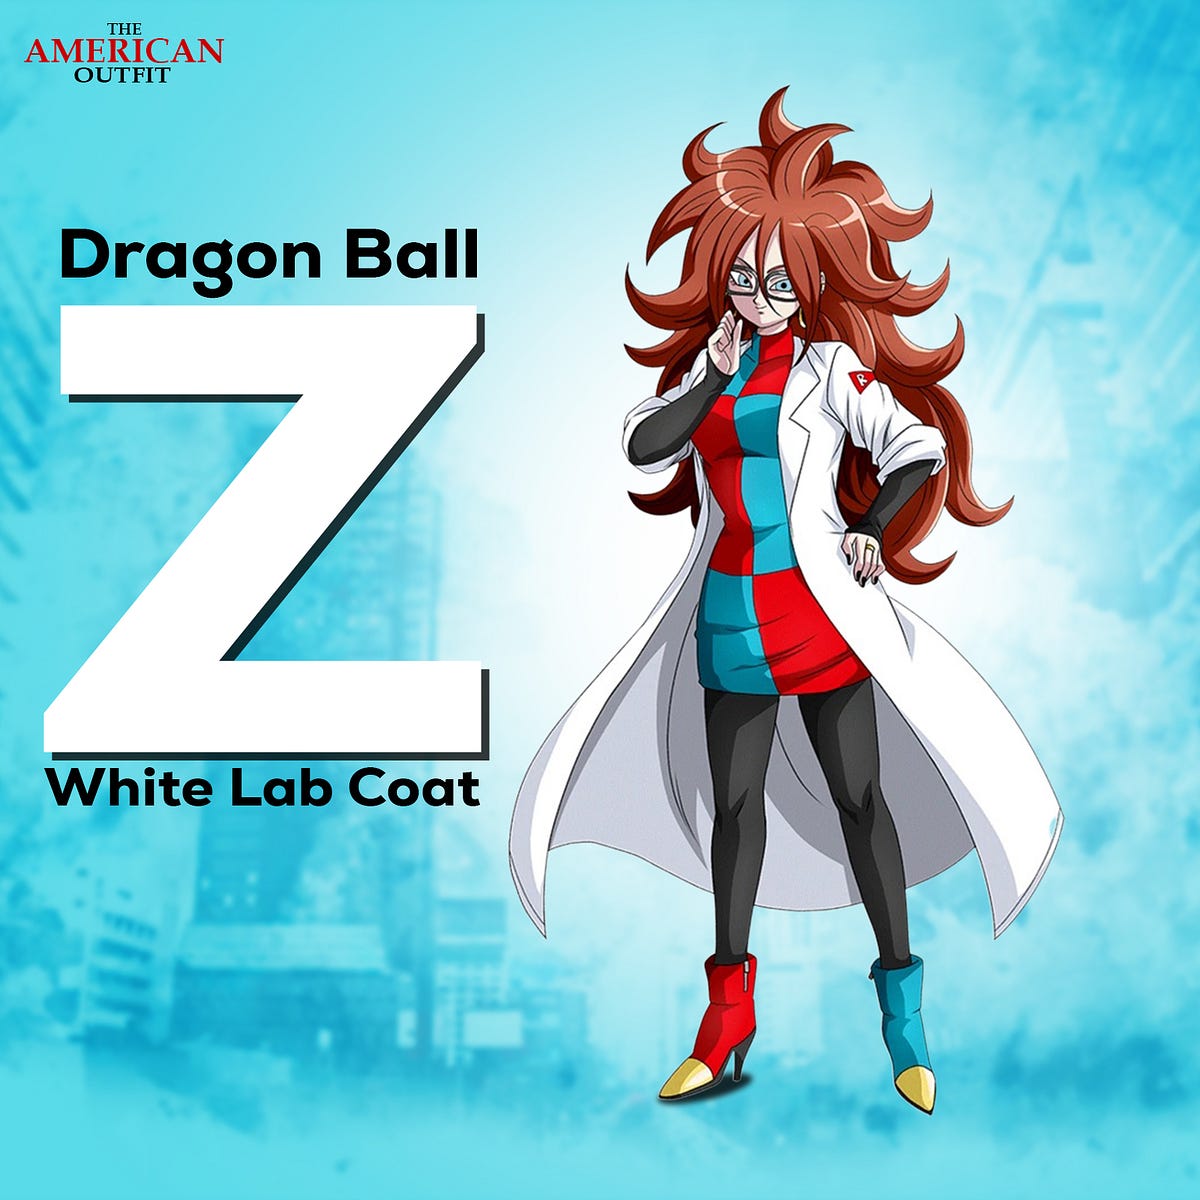 ANDROID 21 (Lab Coat) is available now in DRAGON BALL FIGHTERZ